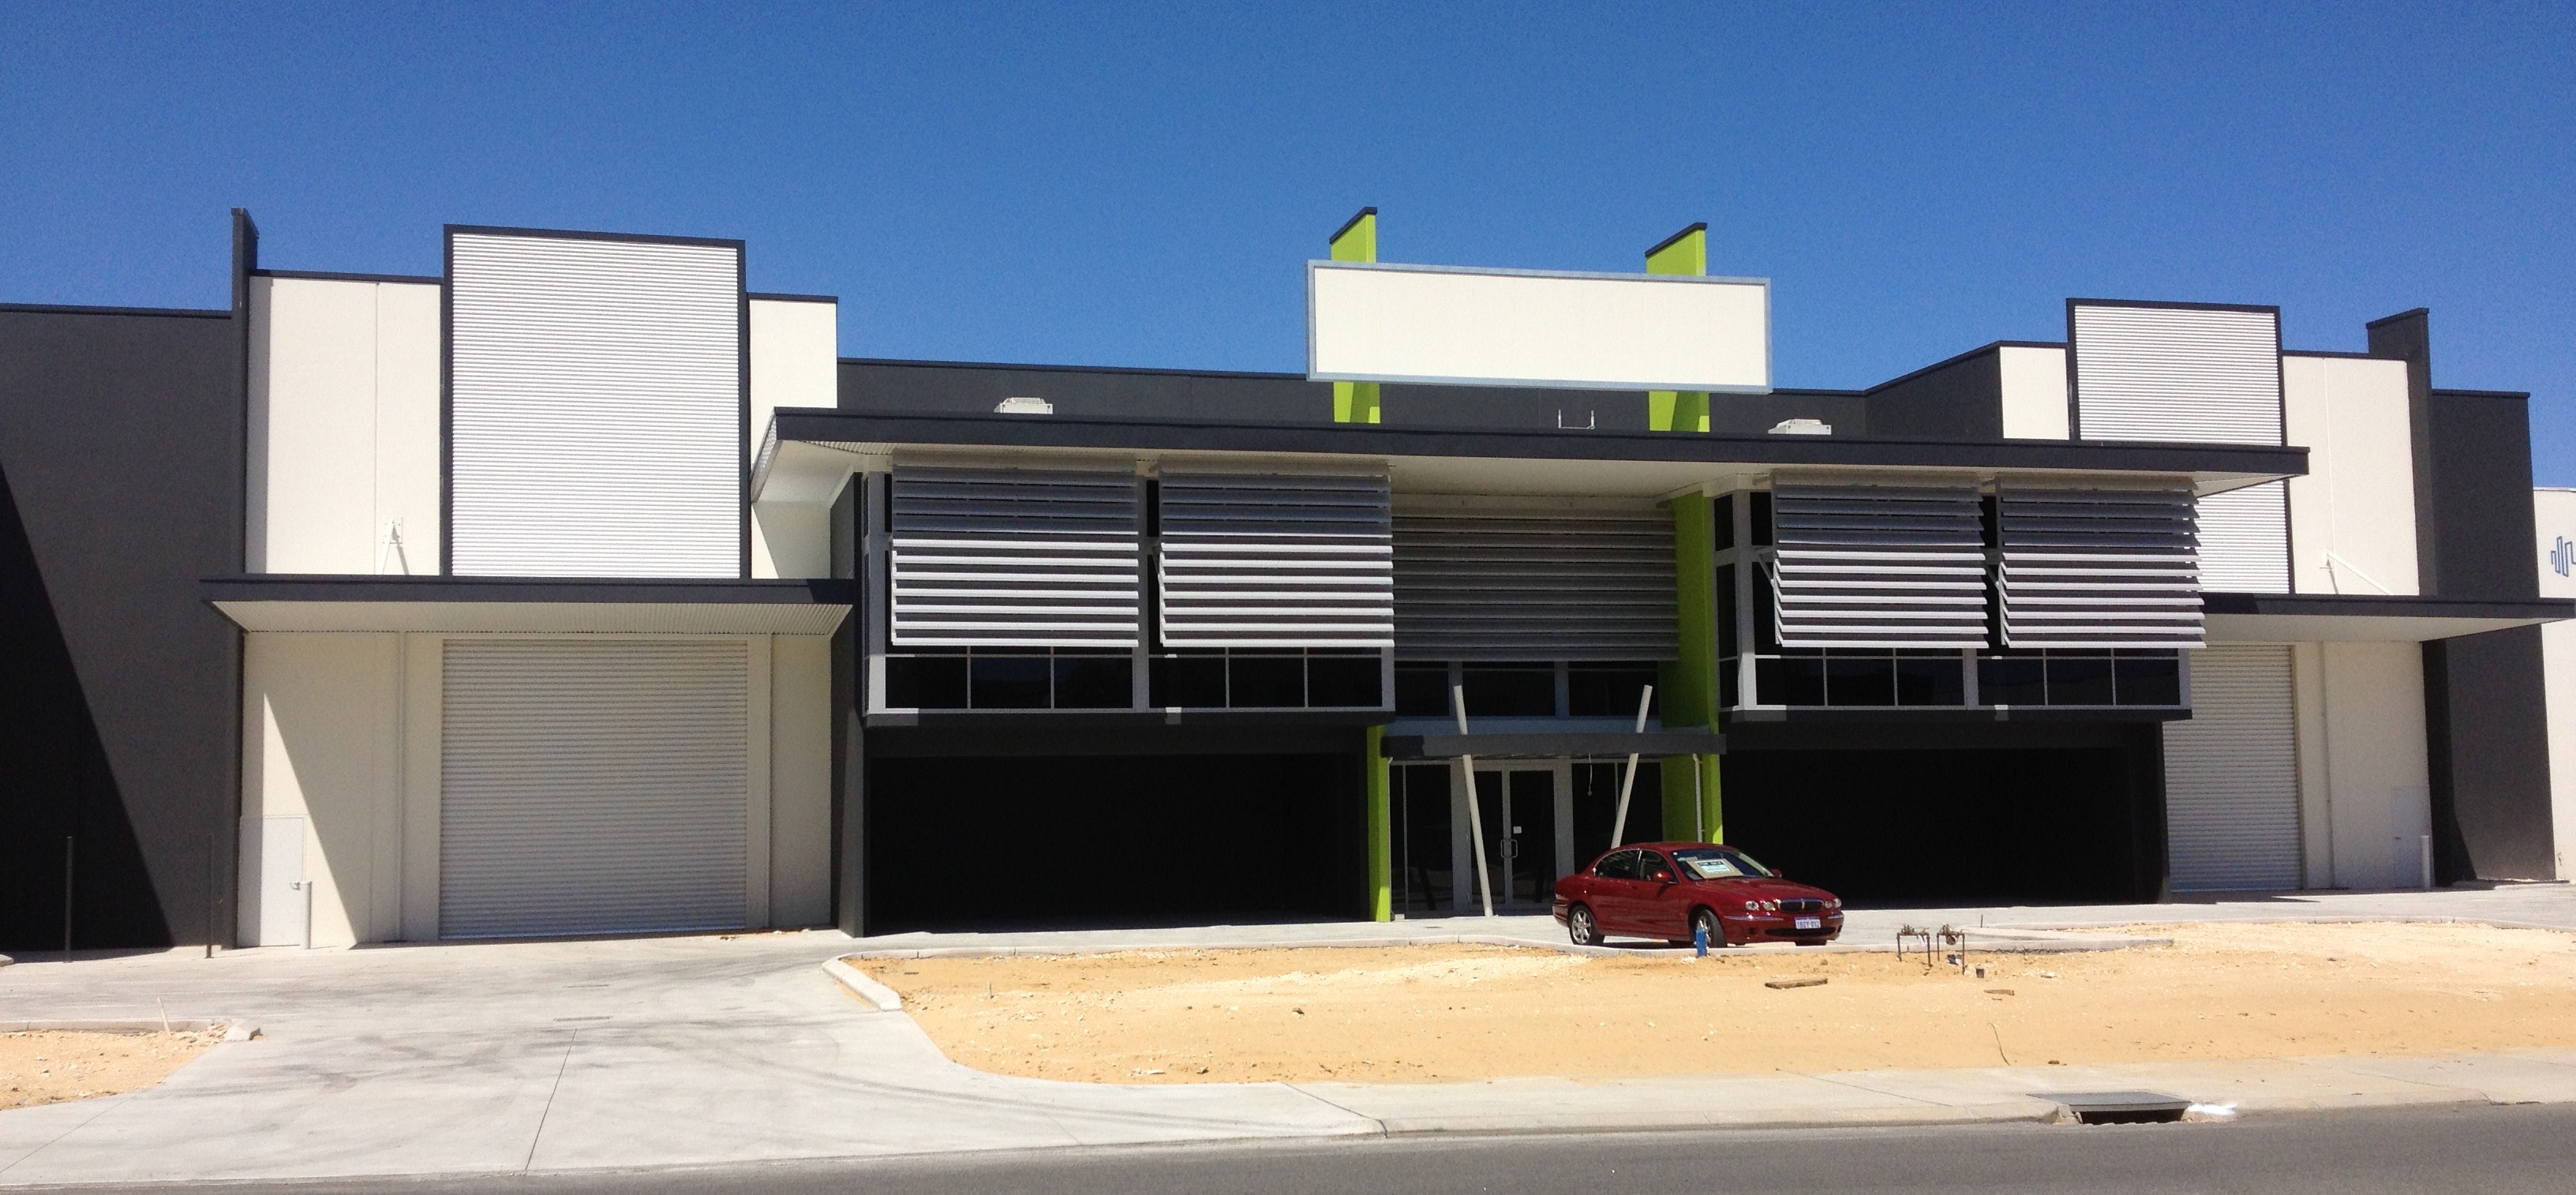 Exterior of large commercial warehouse units, painted in dark grey with lime accents.